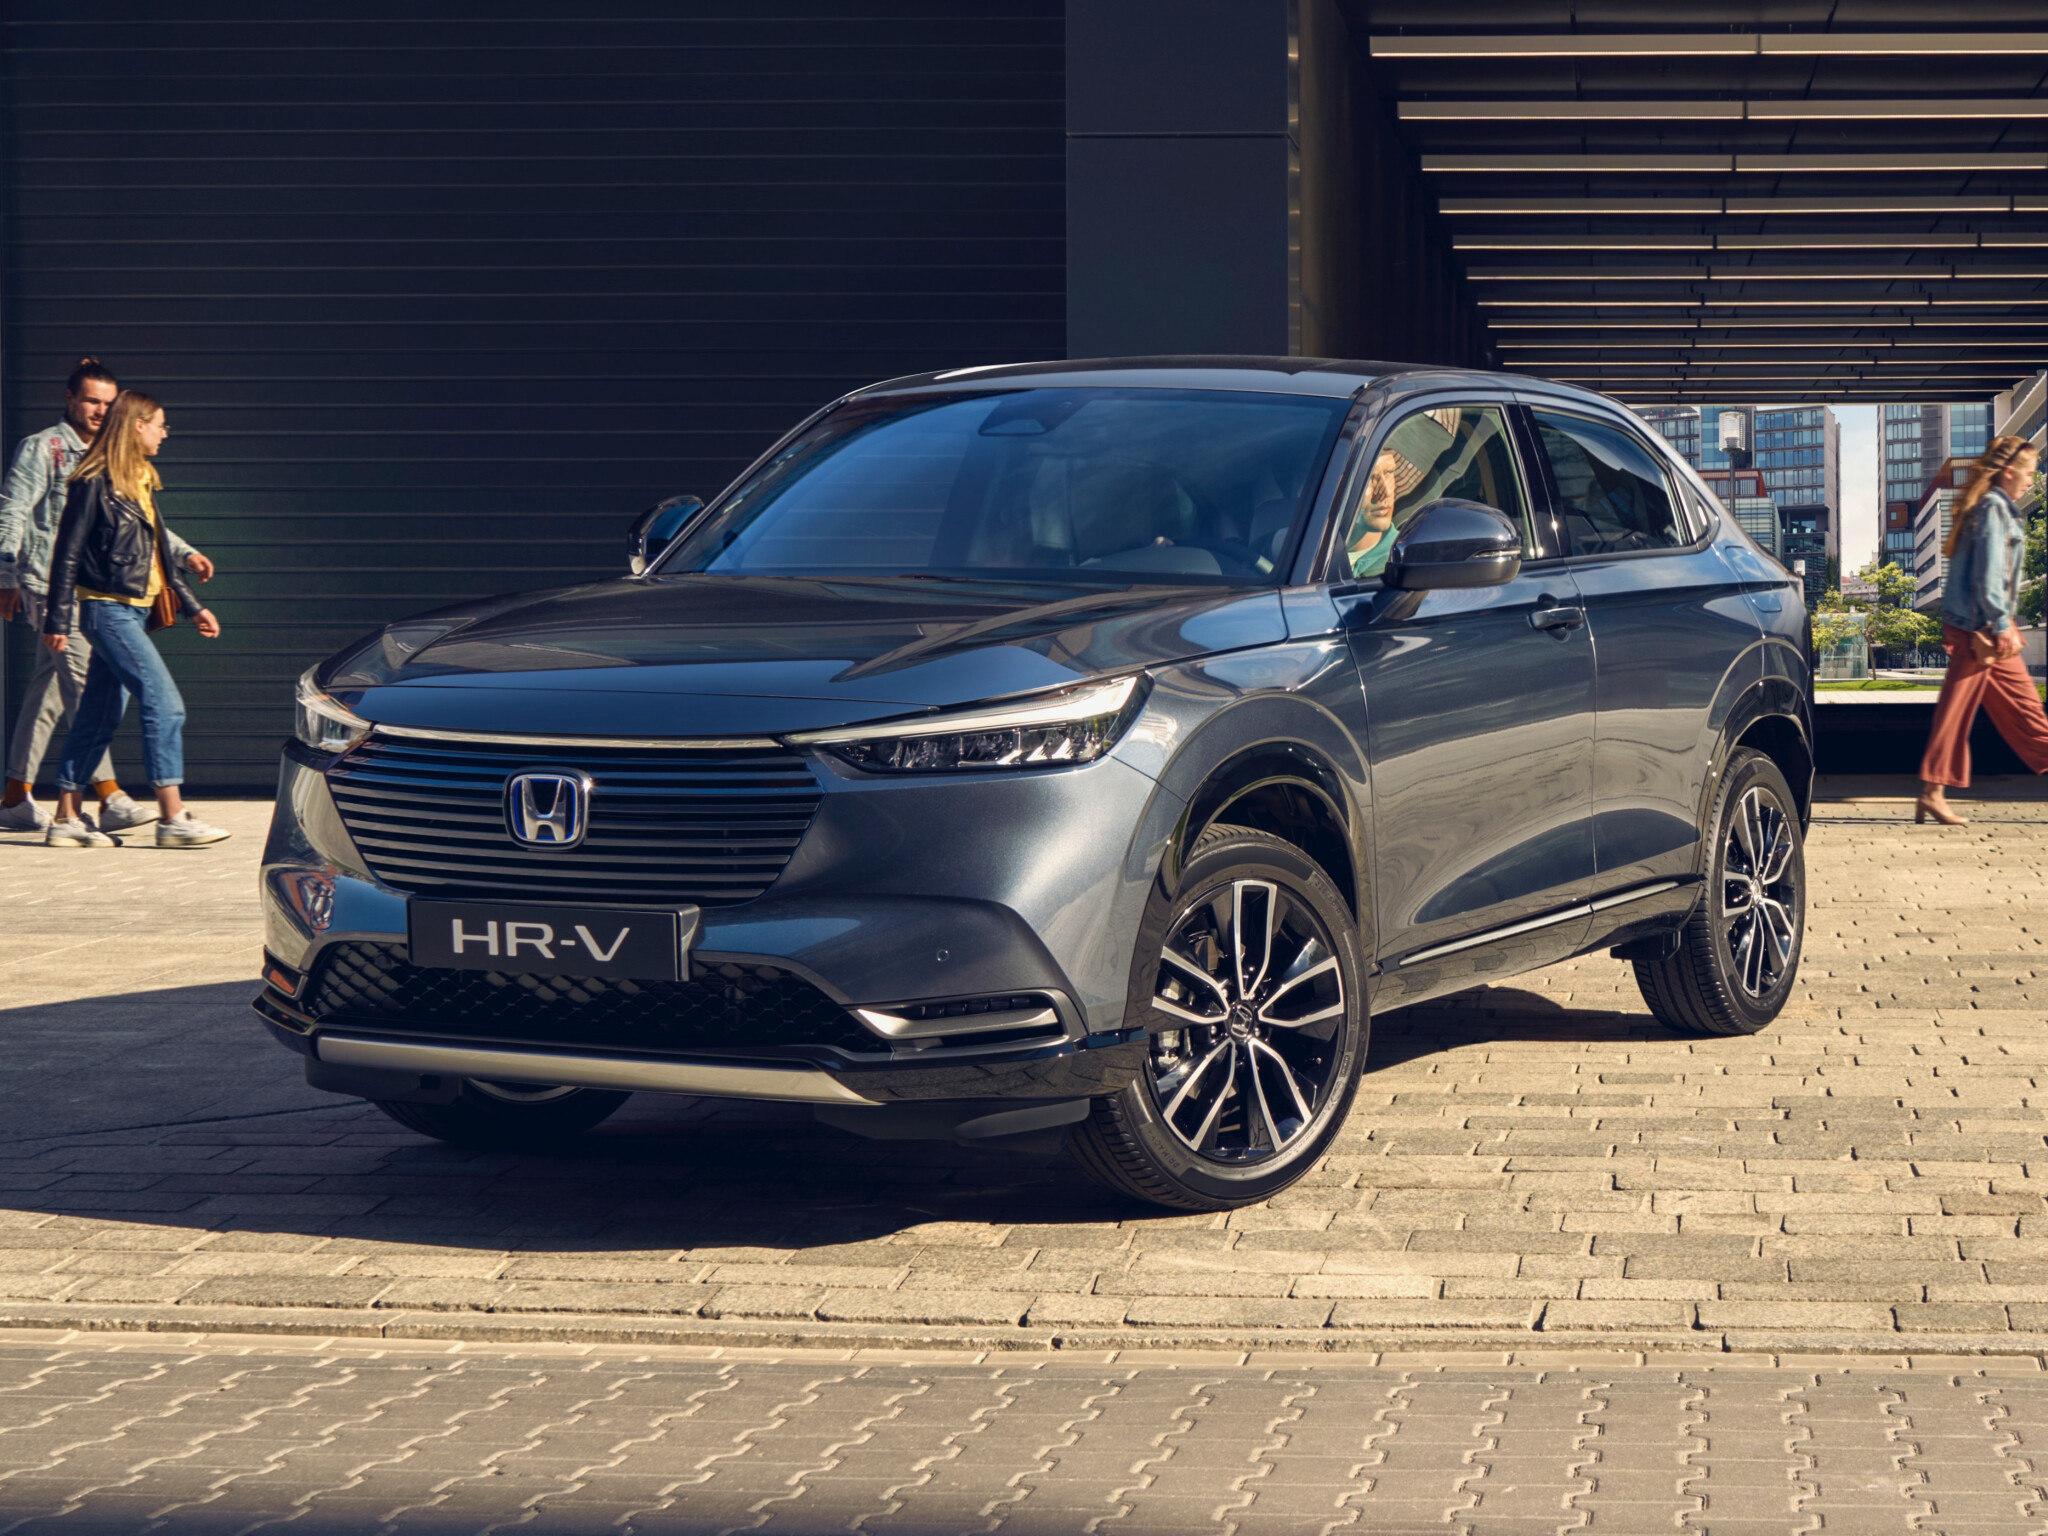 2022 Honda HR-V Australian pricing and features revealed